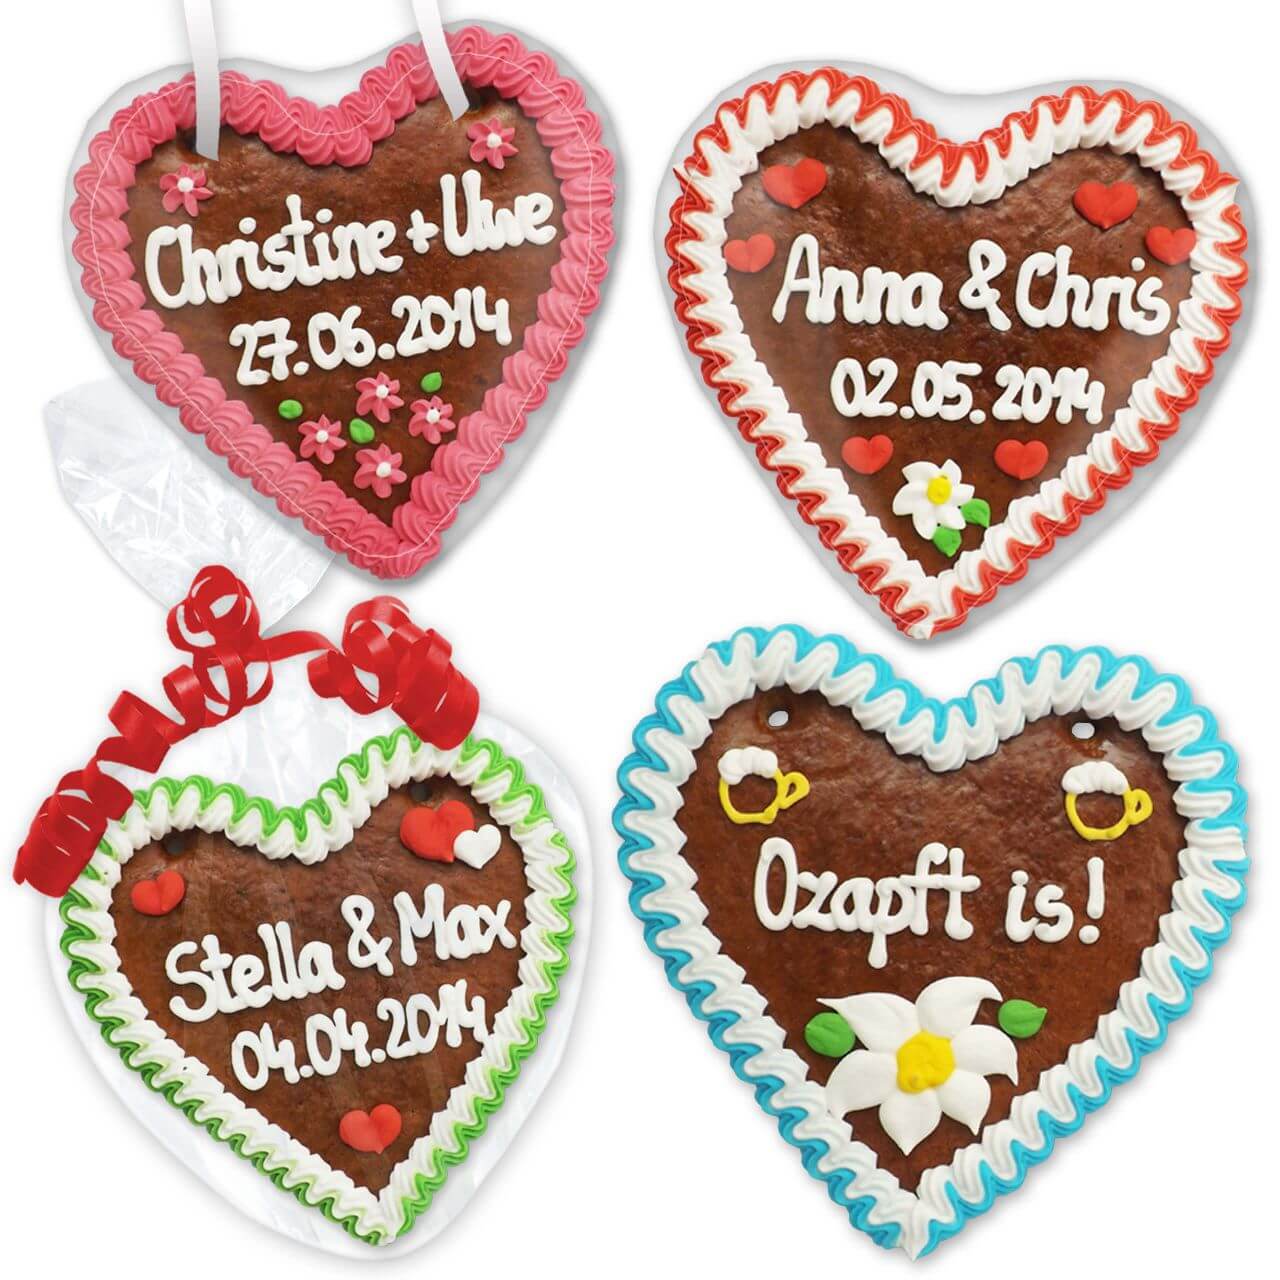 Your own designed gingerbread heart 16cm